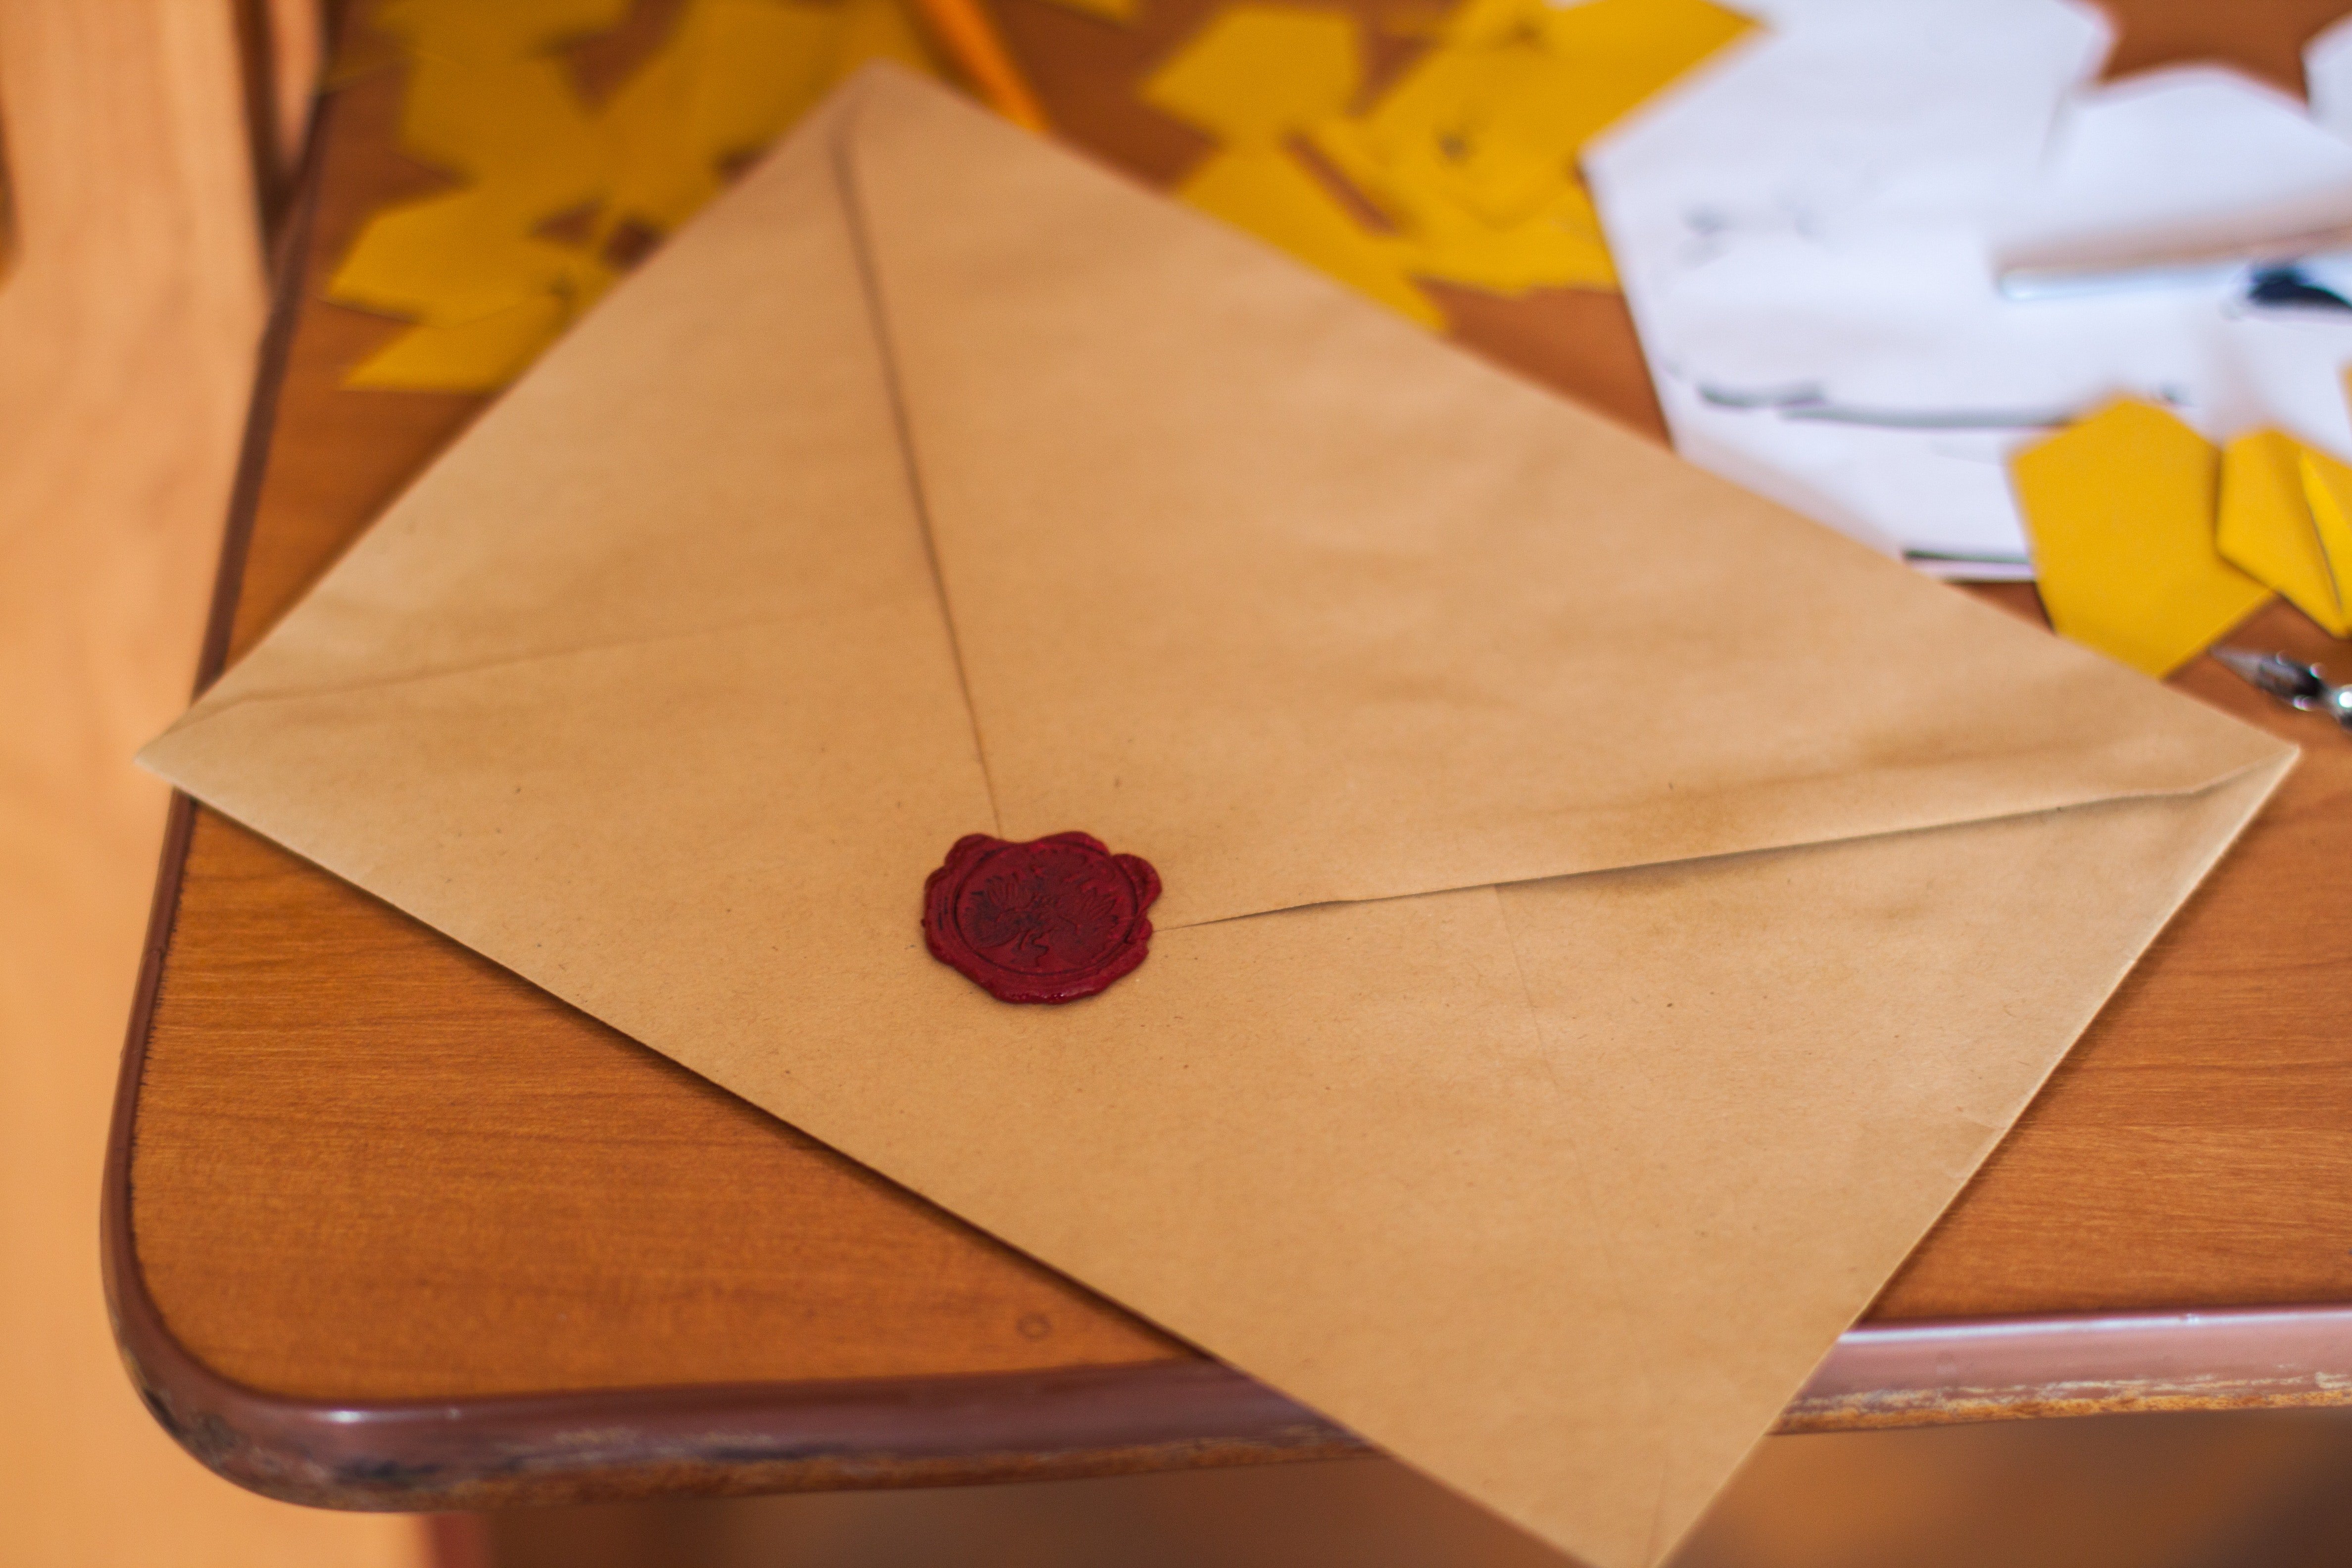 One day, Robbie got a surprise mail from California. | Source: Pexels